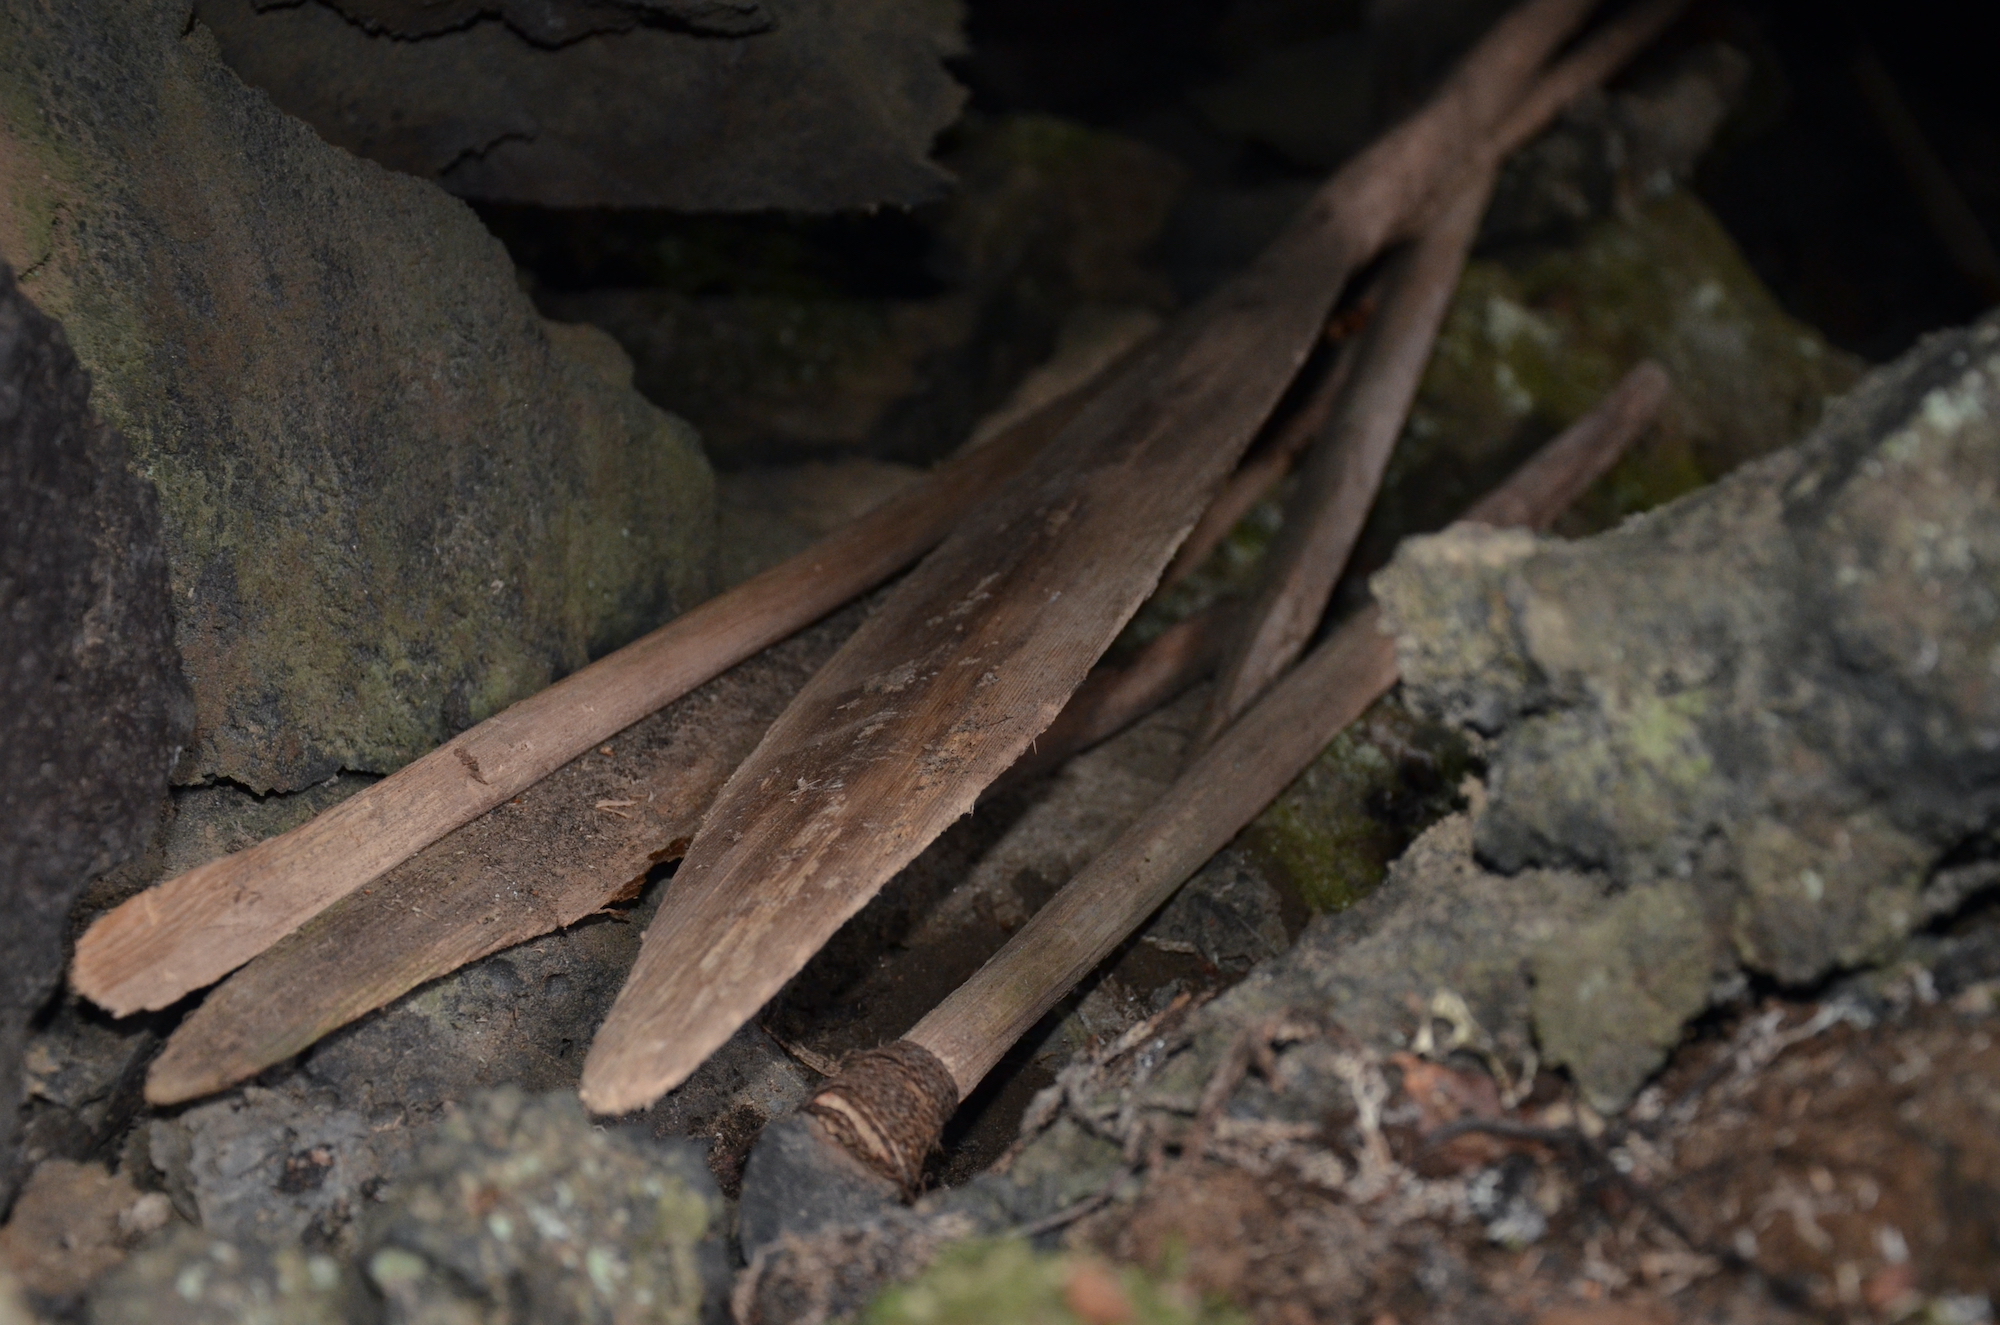 Wooden paddles and shafts lie on lichen-covered rocks in a dim cave area.